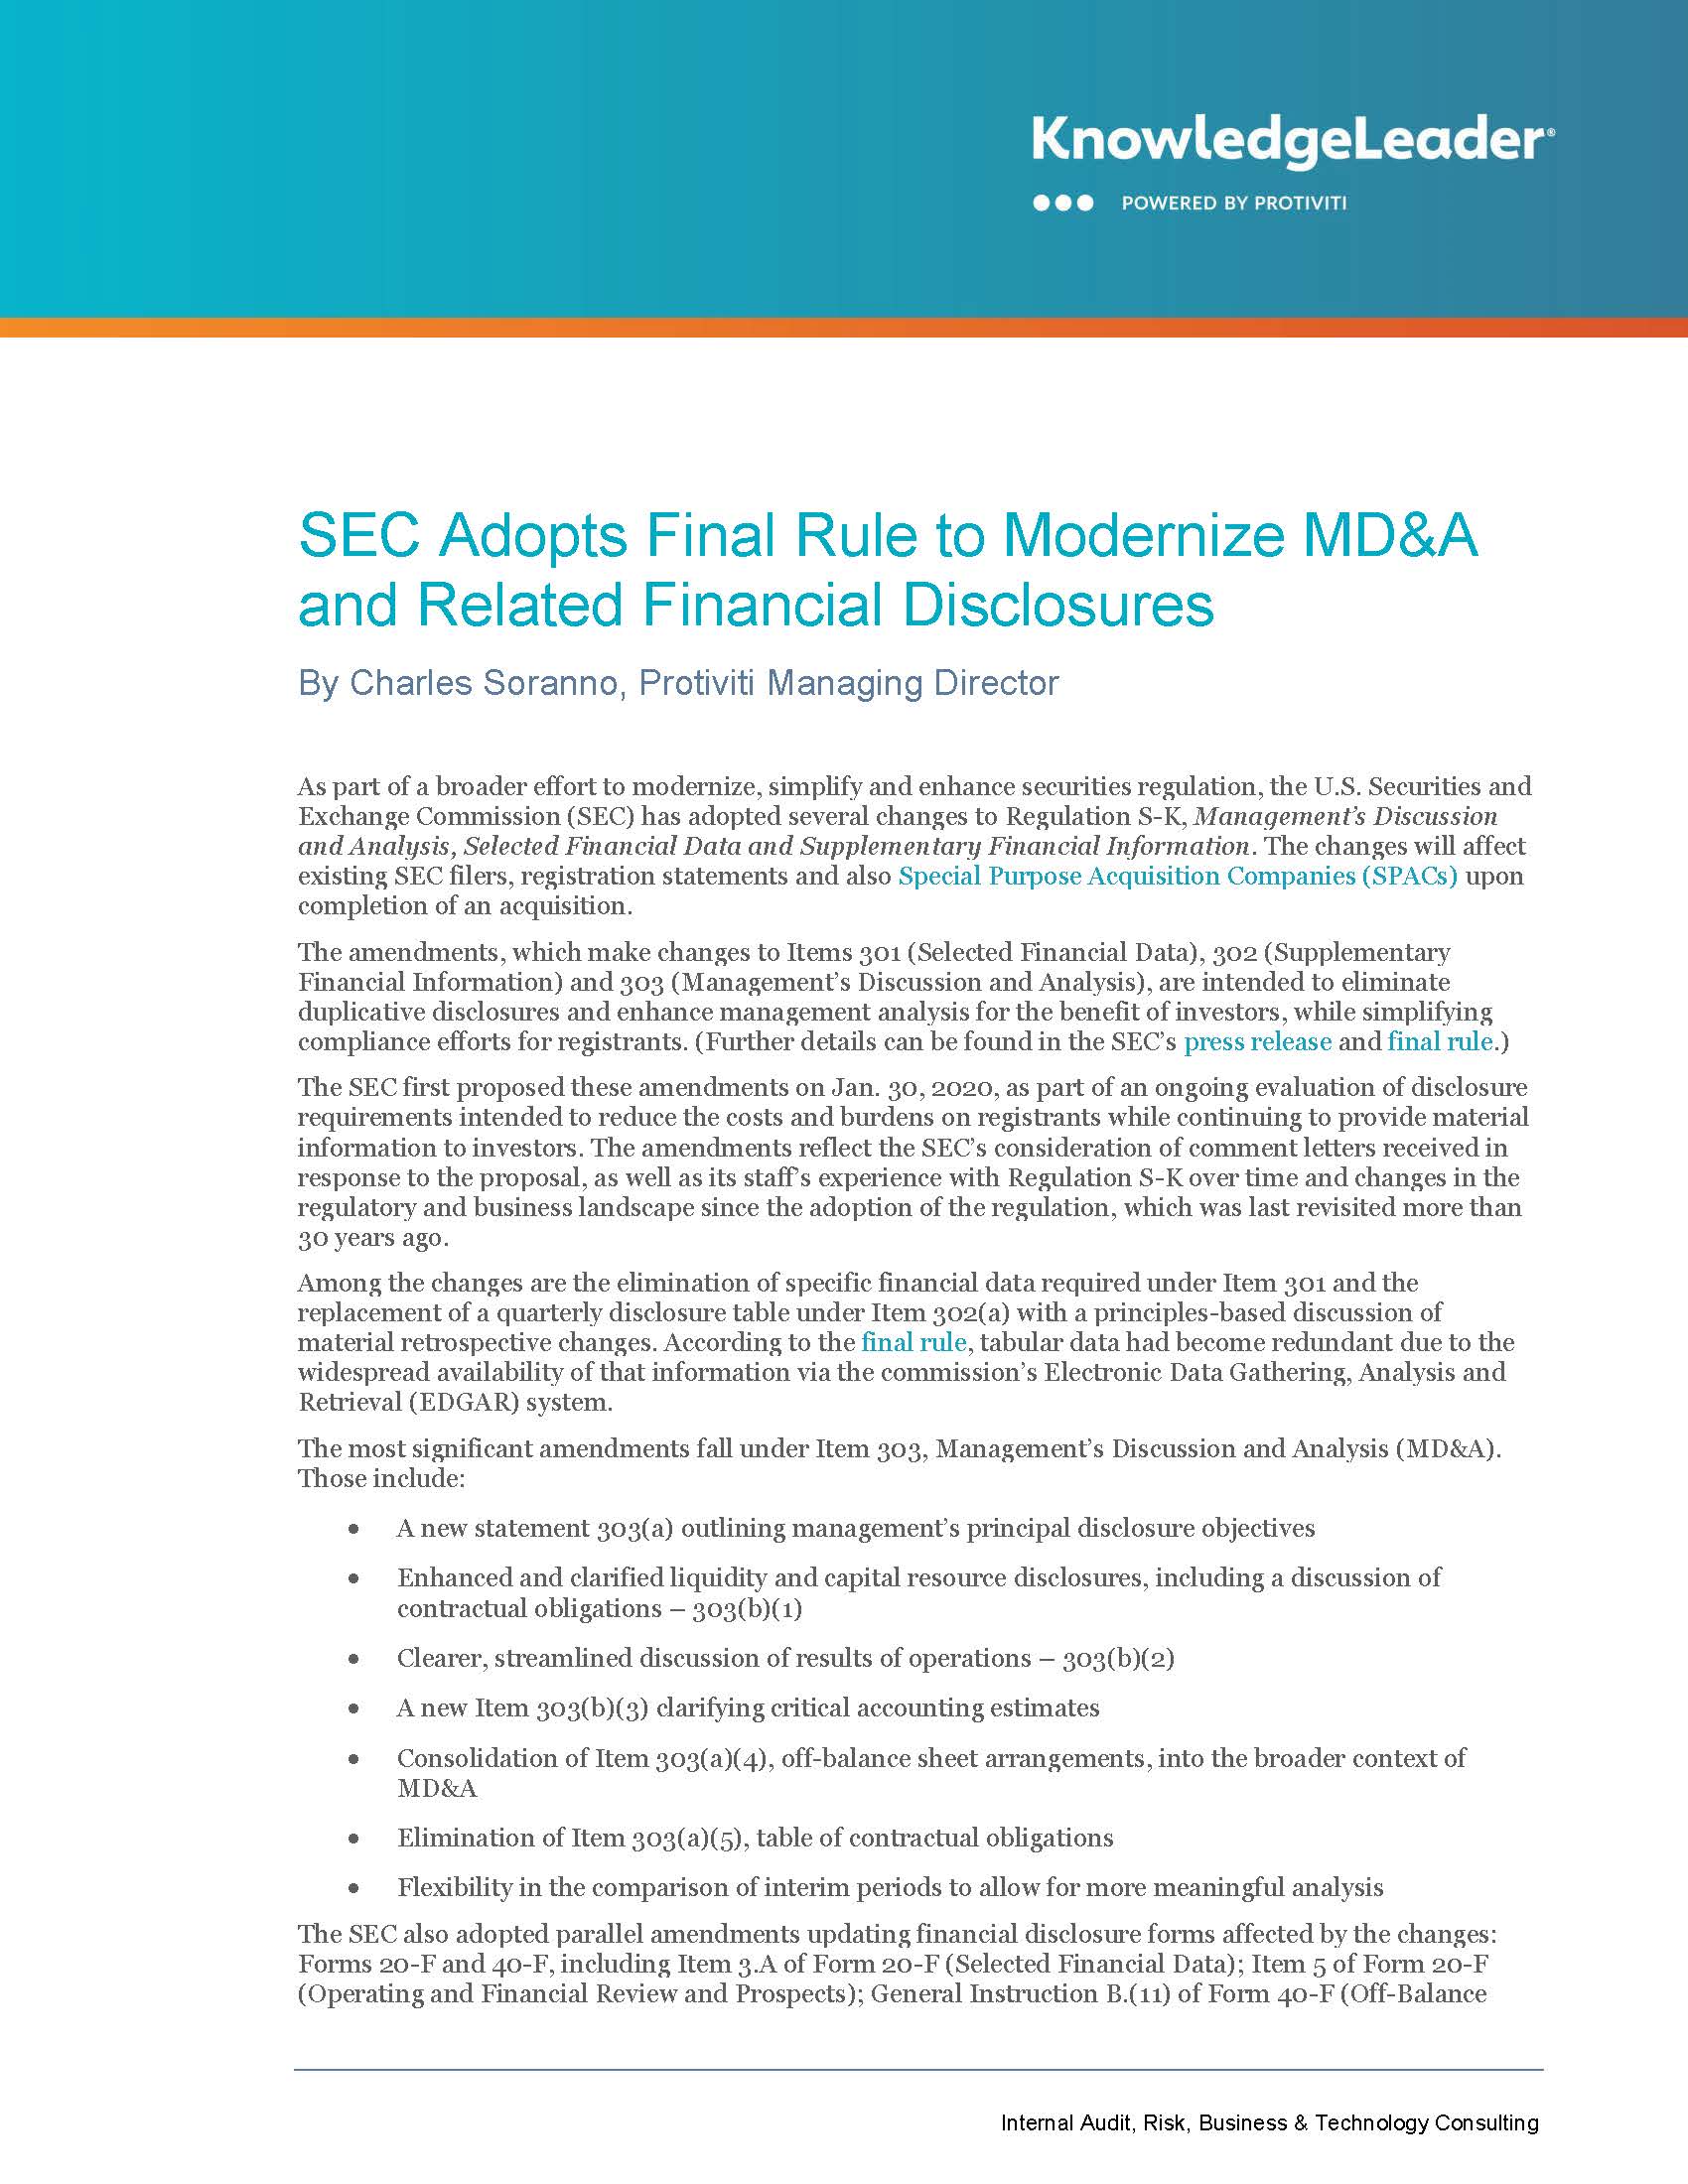 Screenshot of the first page of SEC Adopts Final Rule to Modernize MDA and Related Financial Disclosures